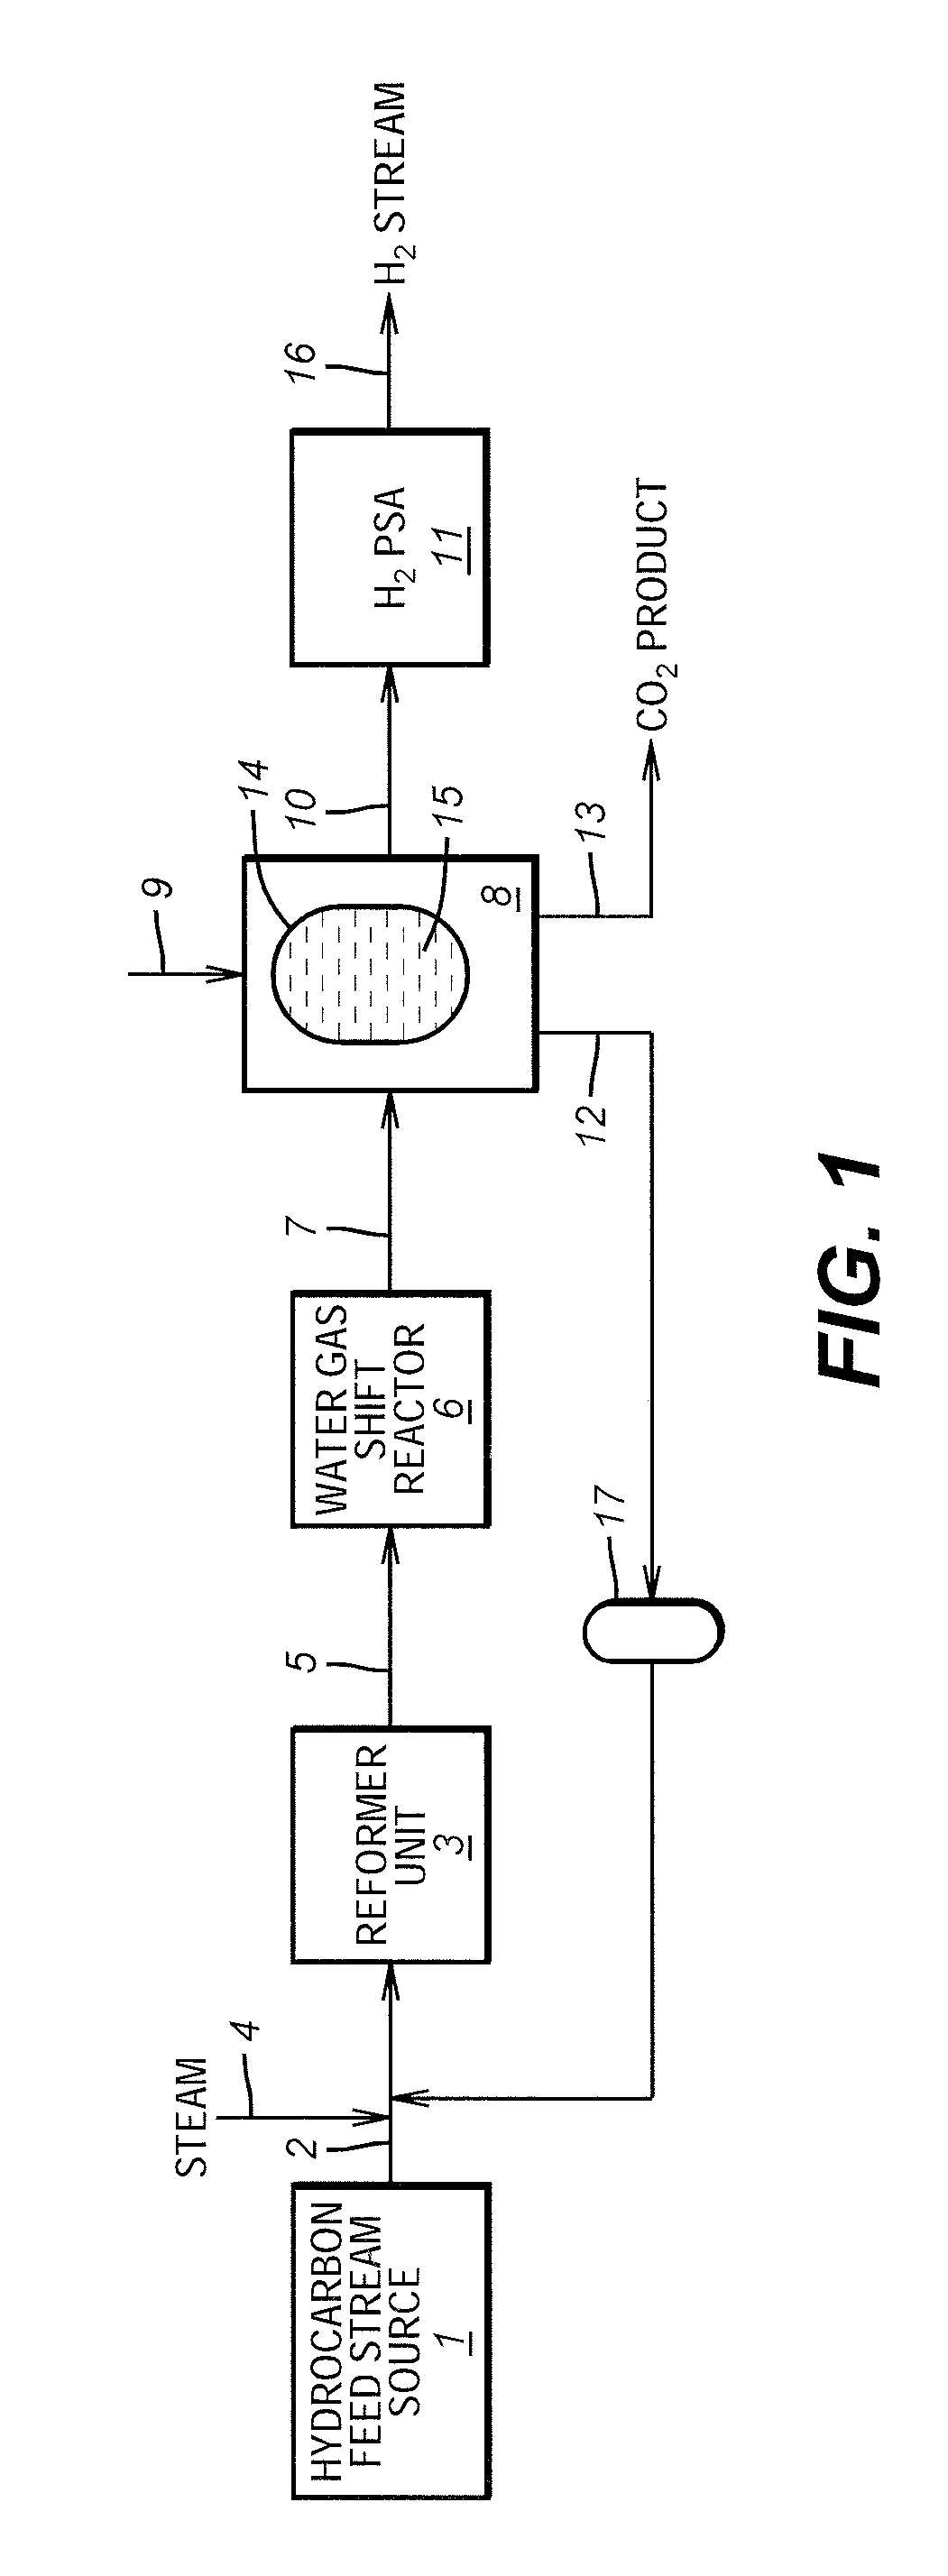 Process For The Production Of Hydrogen And Carbon Dioxide Utilizing Magnesium Based Sorbents In A Fixed Bed